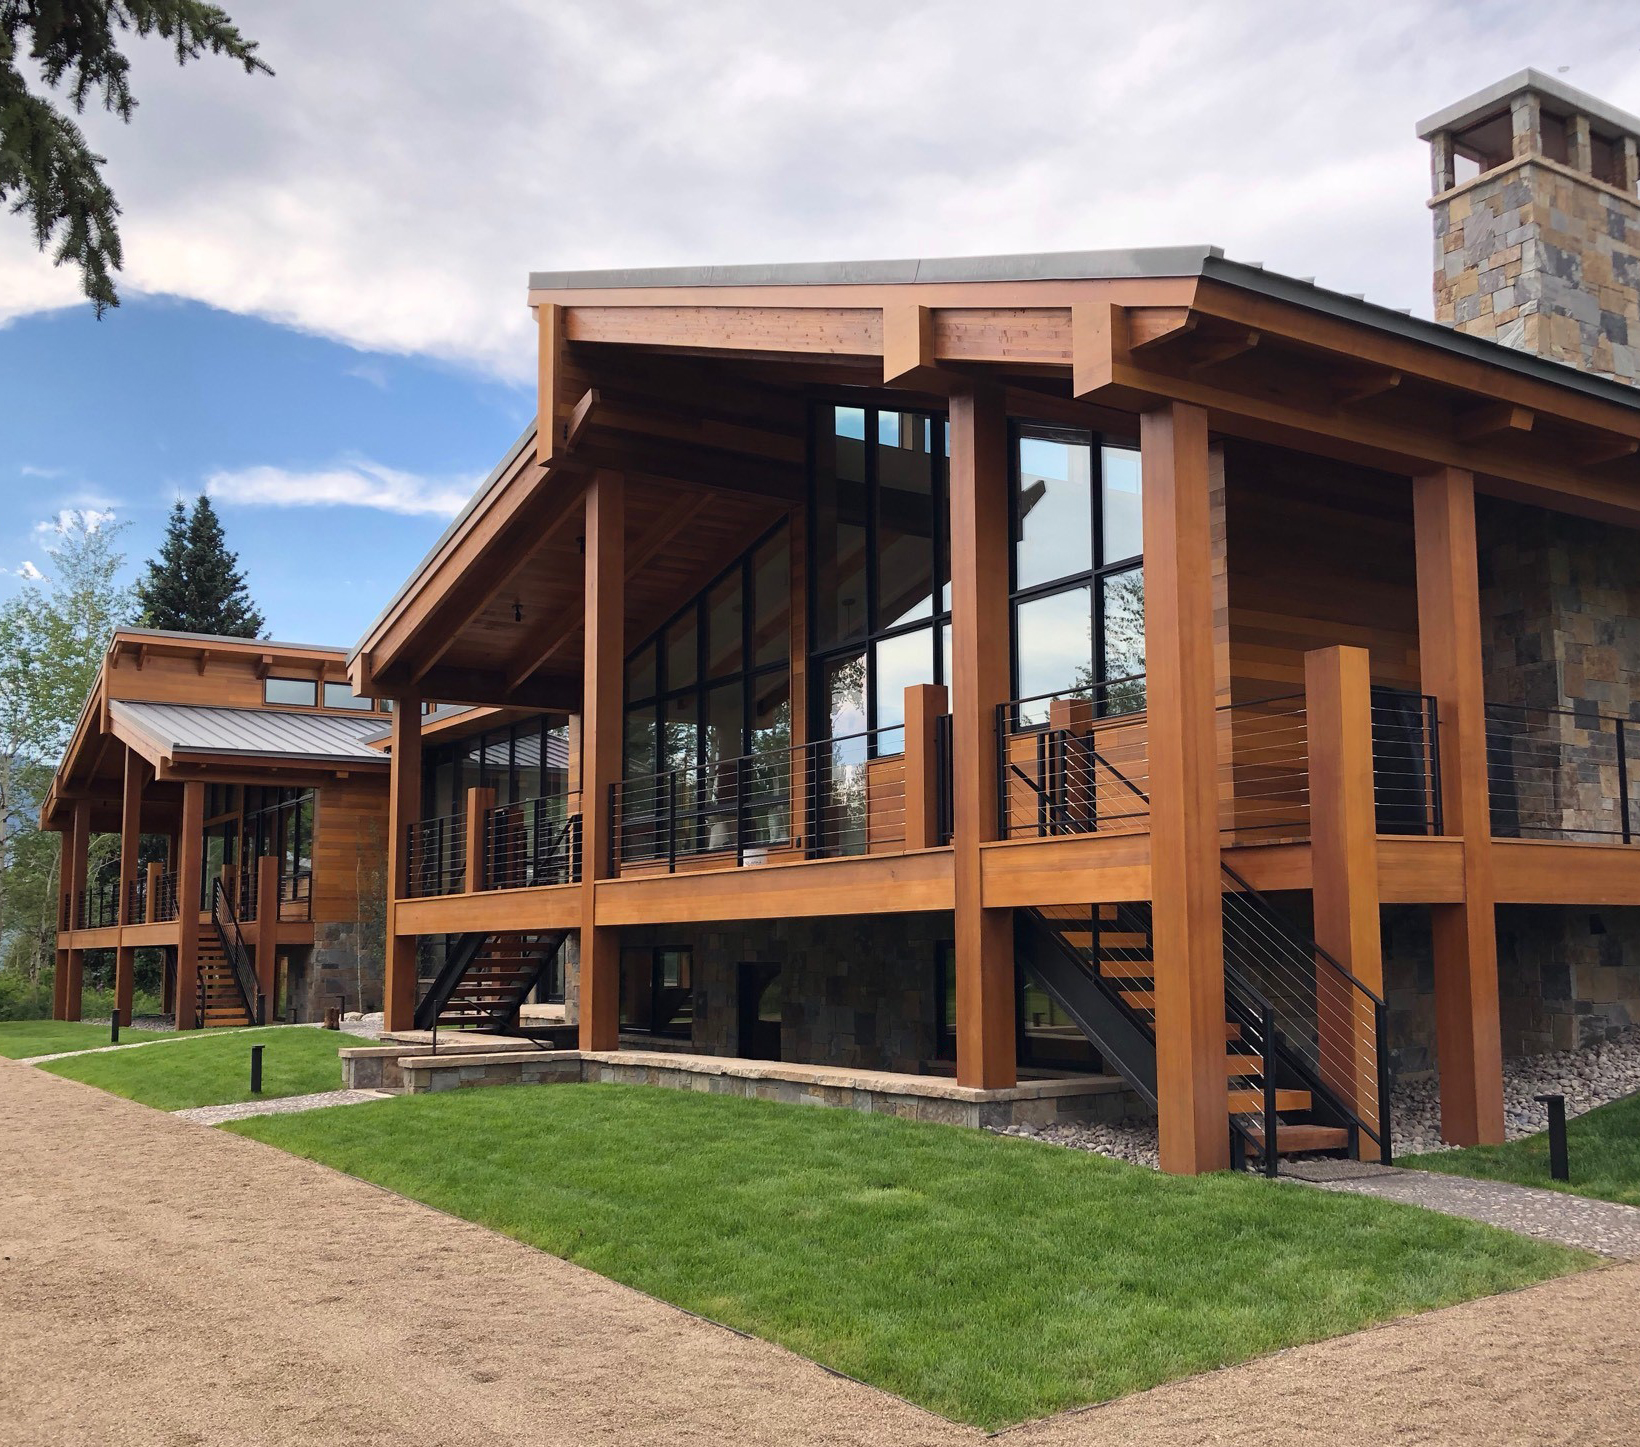 Exterior view of Jackson Hole Ranch by NewStudio Architecture.